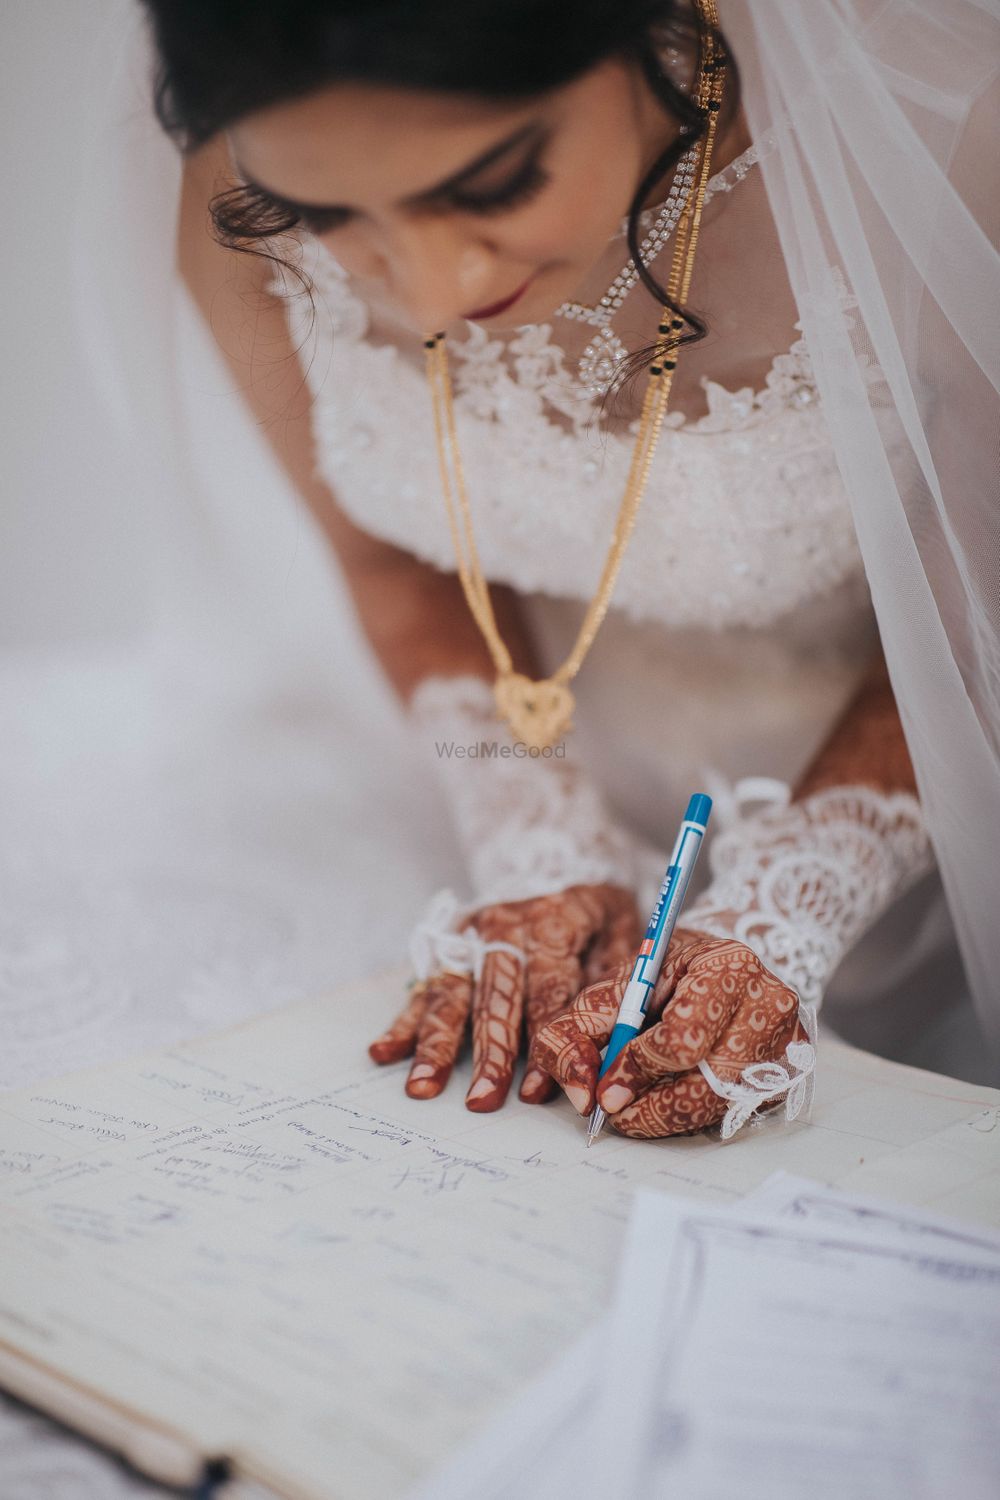 Photo of Bride signing papers during christian wedding